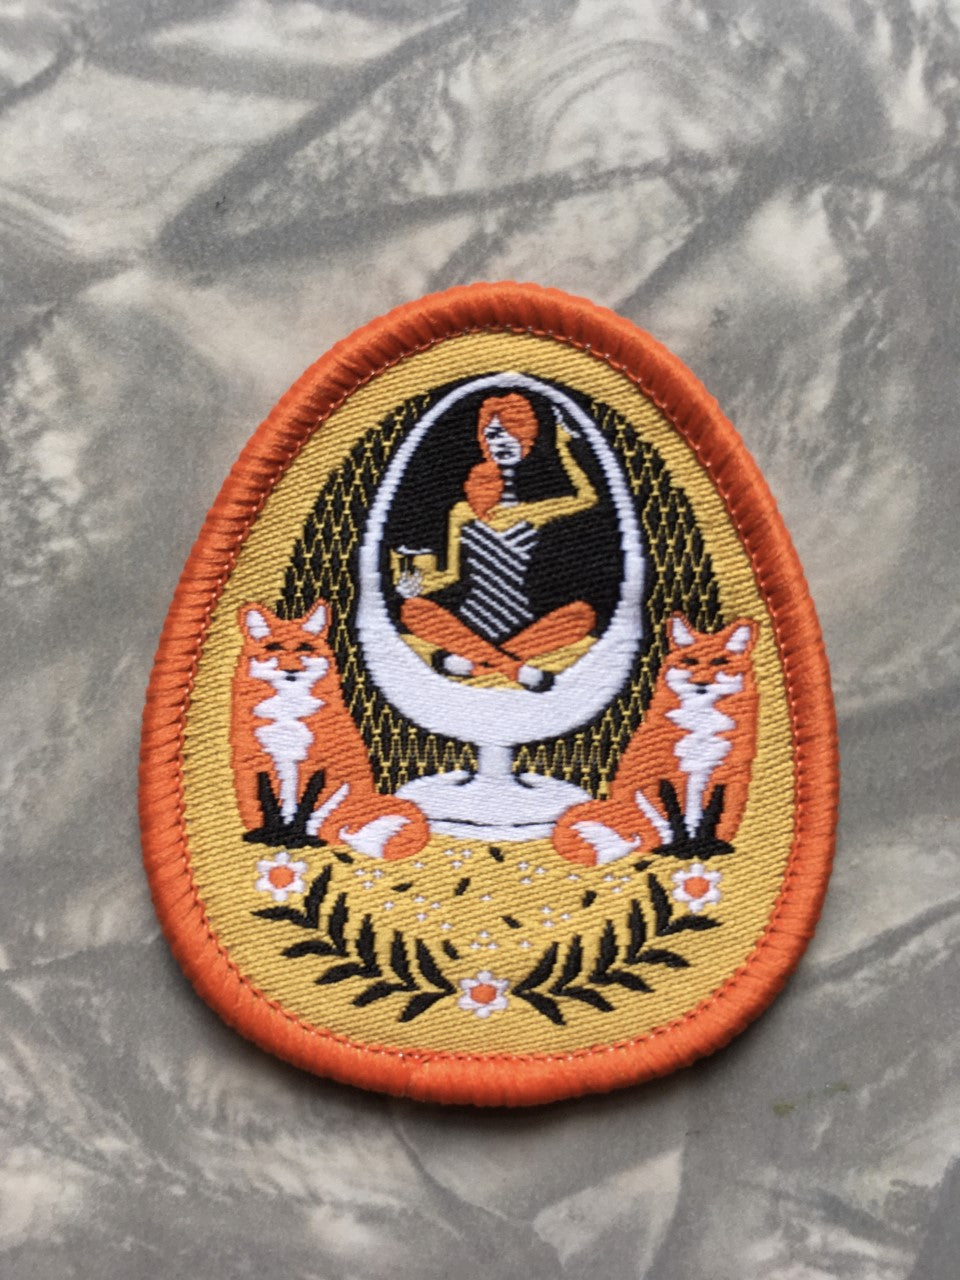 Yellow and orange iron-on patch featuring a girl in an egg chair with 2 foxes and flower accents